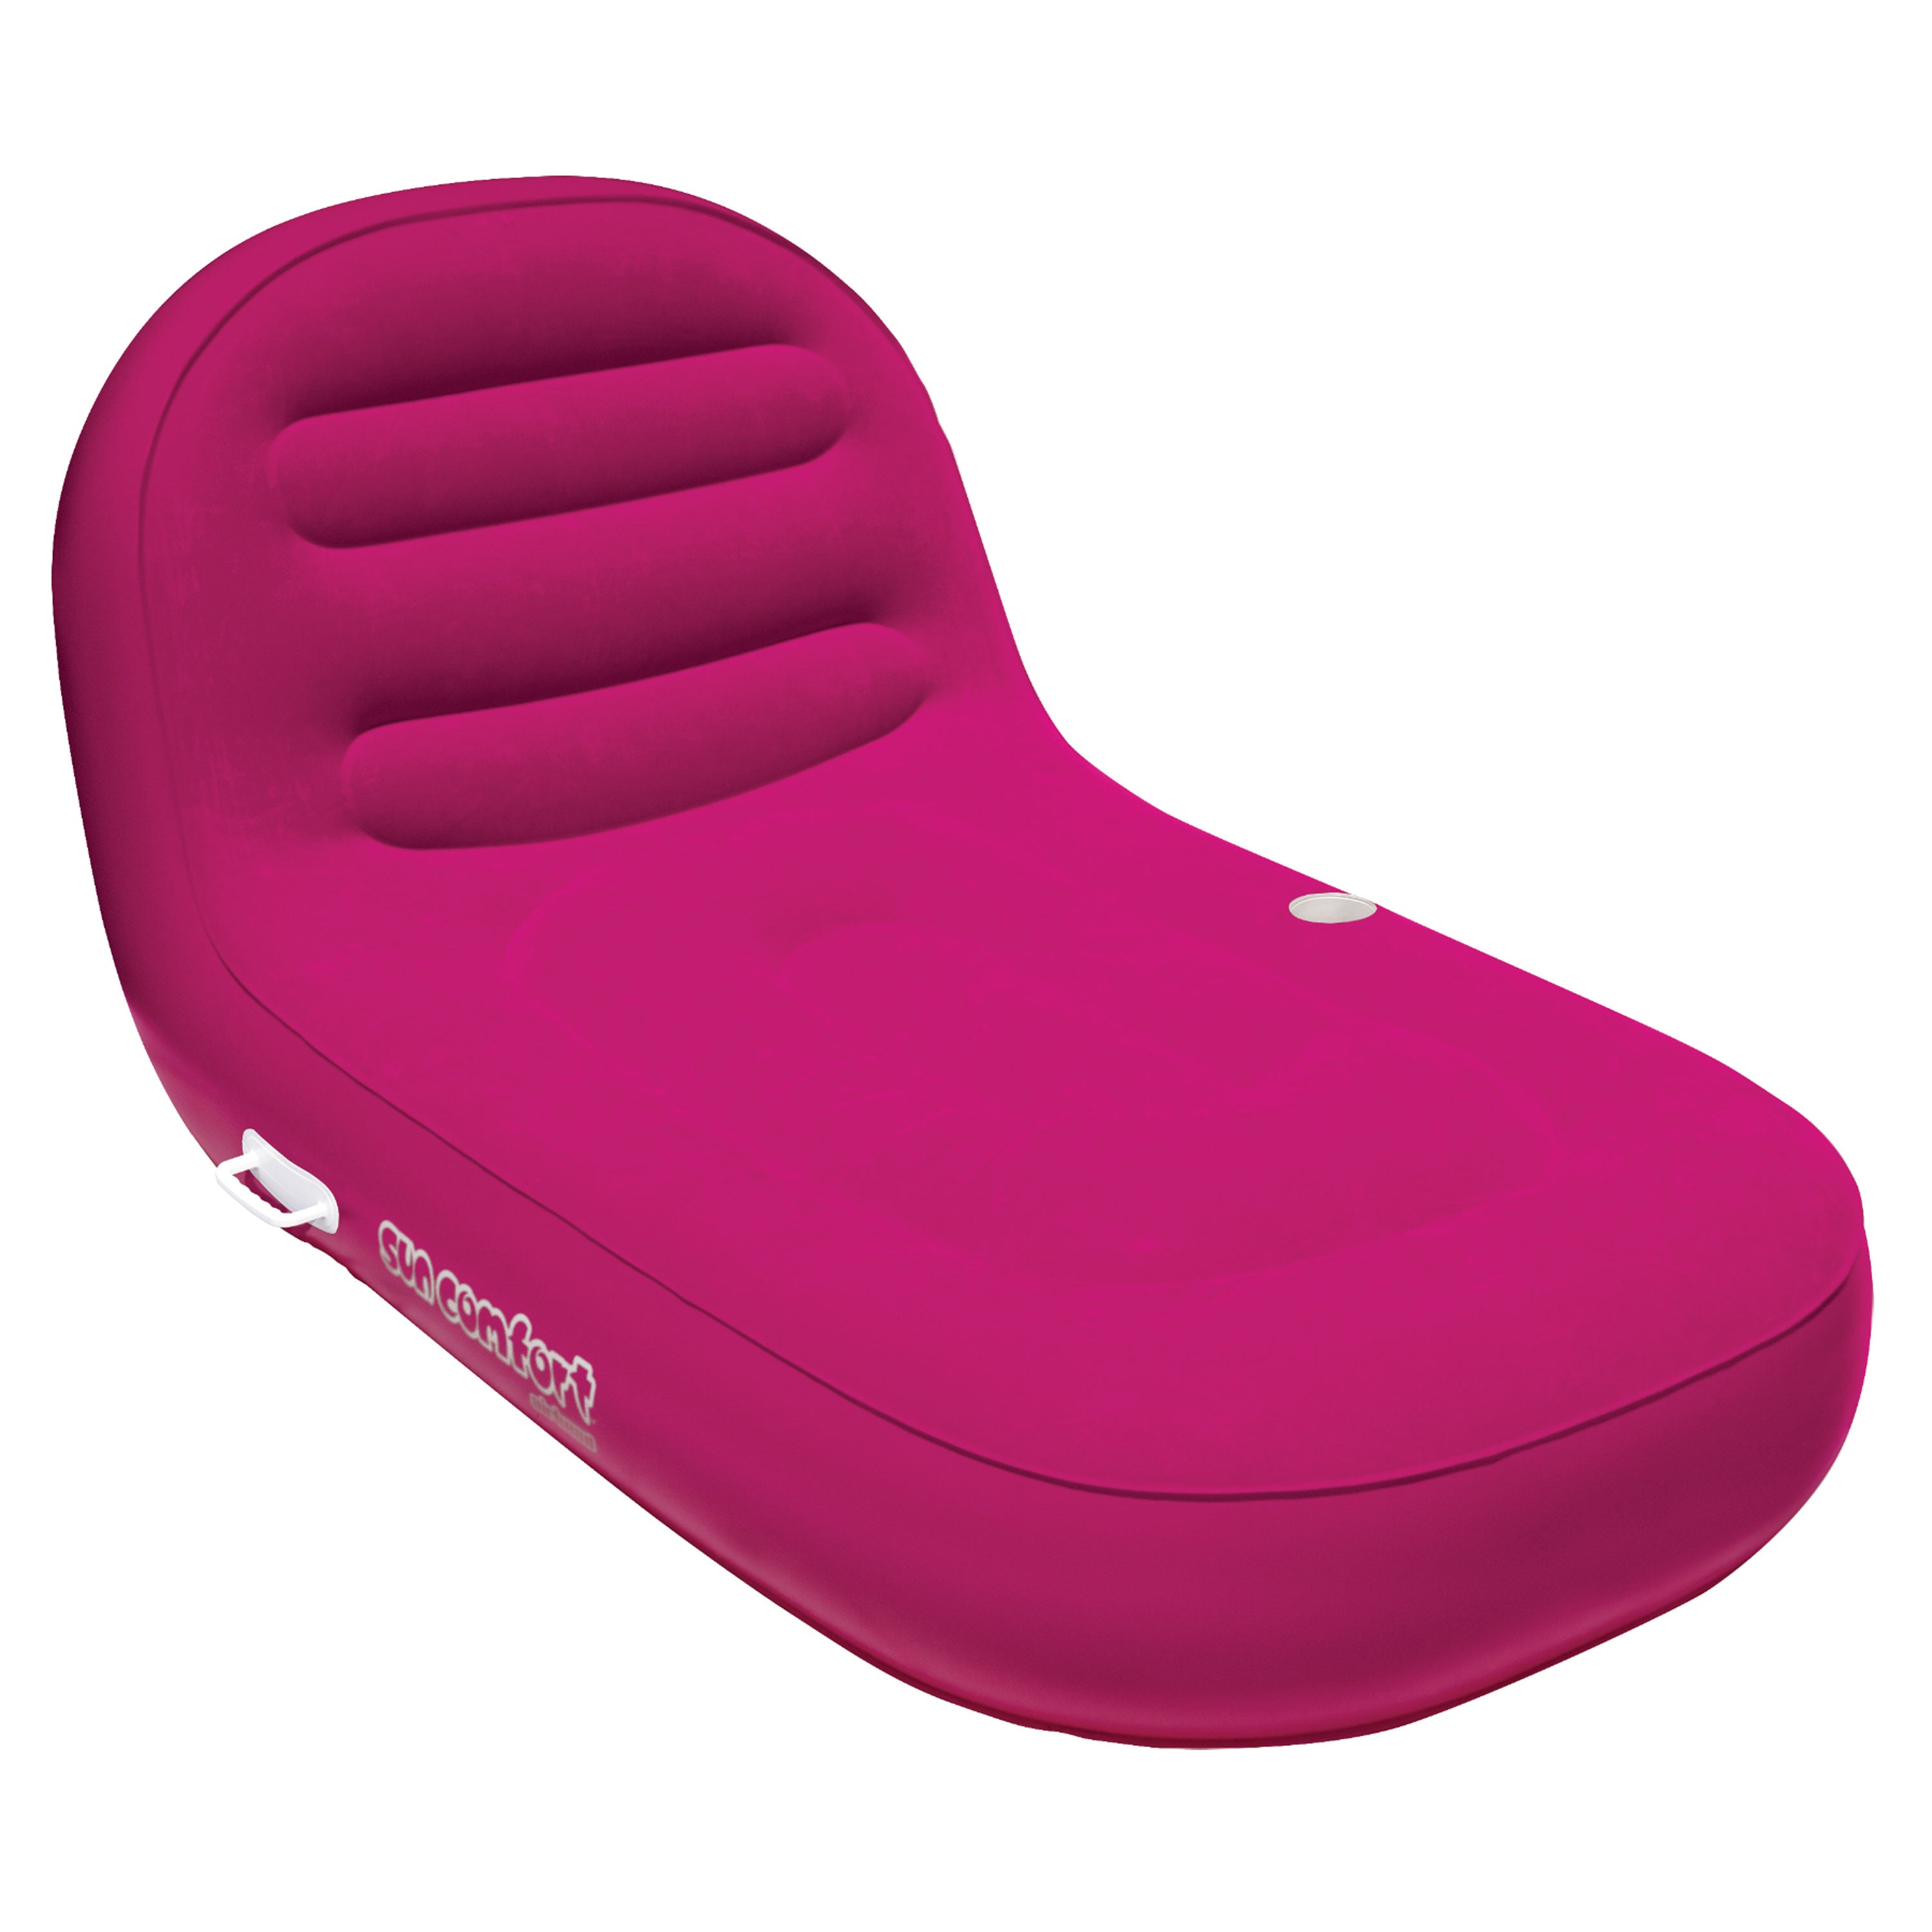 Airhead AHSC-008 Sun Comfort Inflatable Suede Chaise Lounge - Raspberry